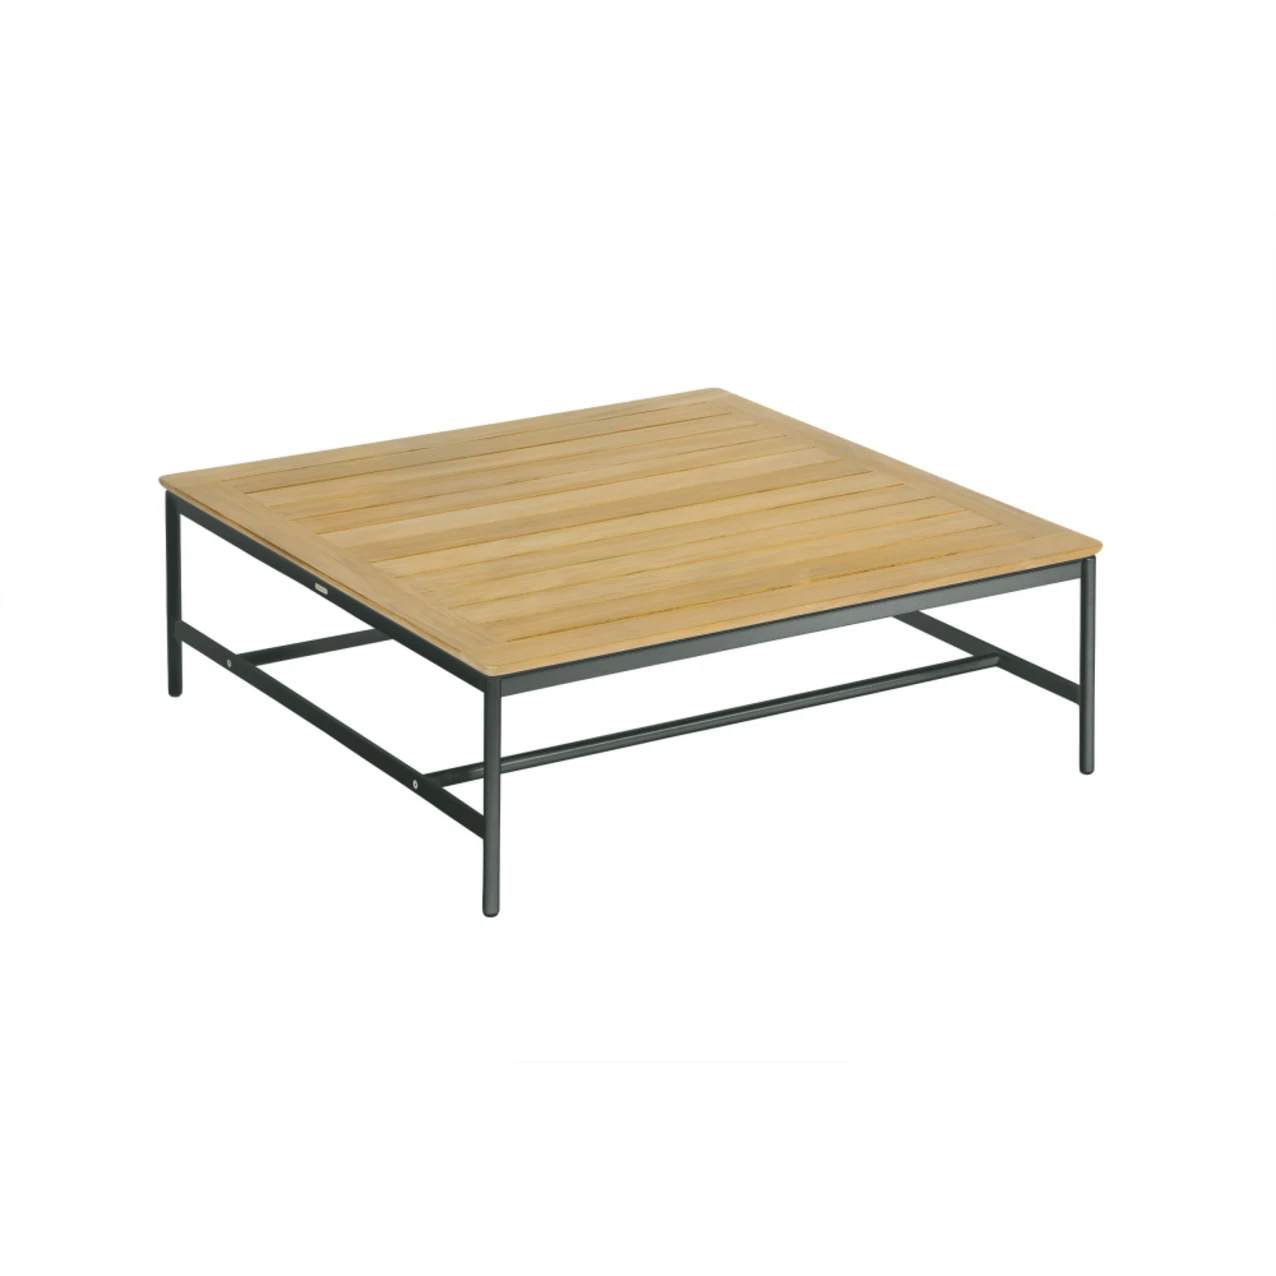 Barlow Tyrie Around 40" Square Coffee Table | Forge Grey Aluminum Frame